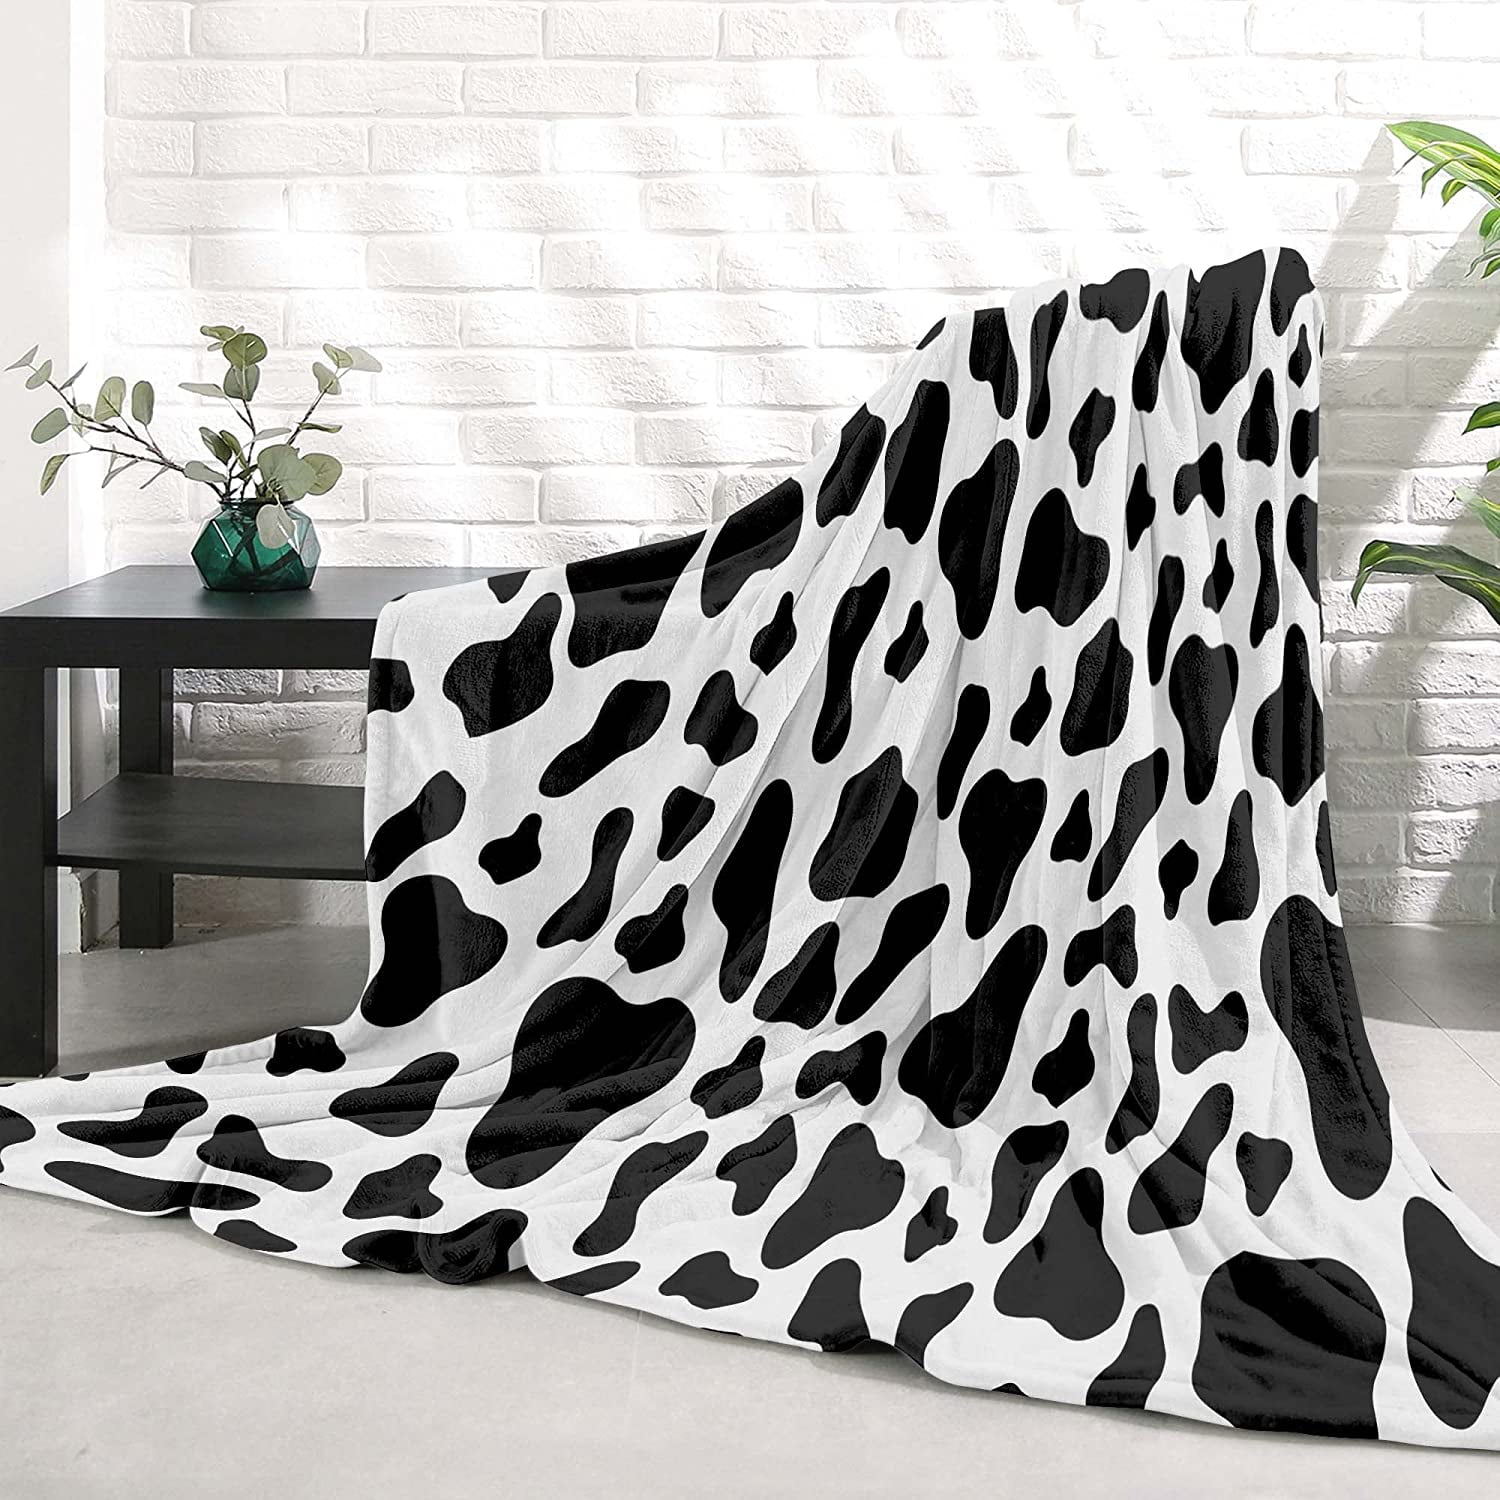 Overtuiging heel acre OUXIOAZ Cow Print Blanket, Fleece Soft Black and White Cow Throw Blanket  for Couch Cow Stuff Gift Cow Bedding Bedroom Decor for Baby, Kids, Adults  40x50 Inch - Walmart.com